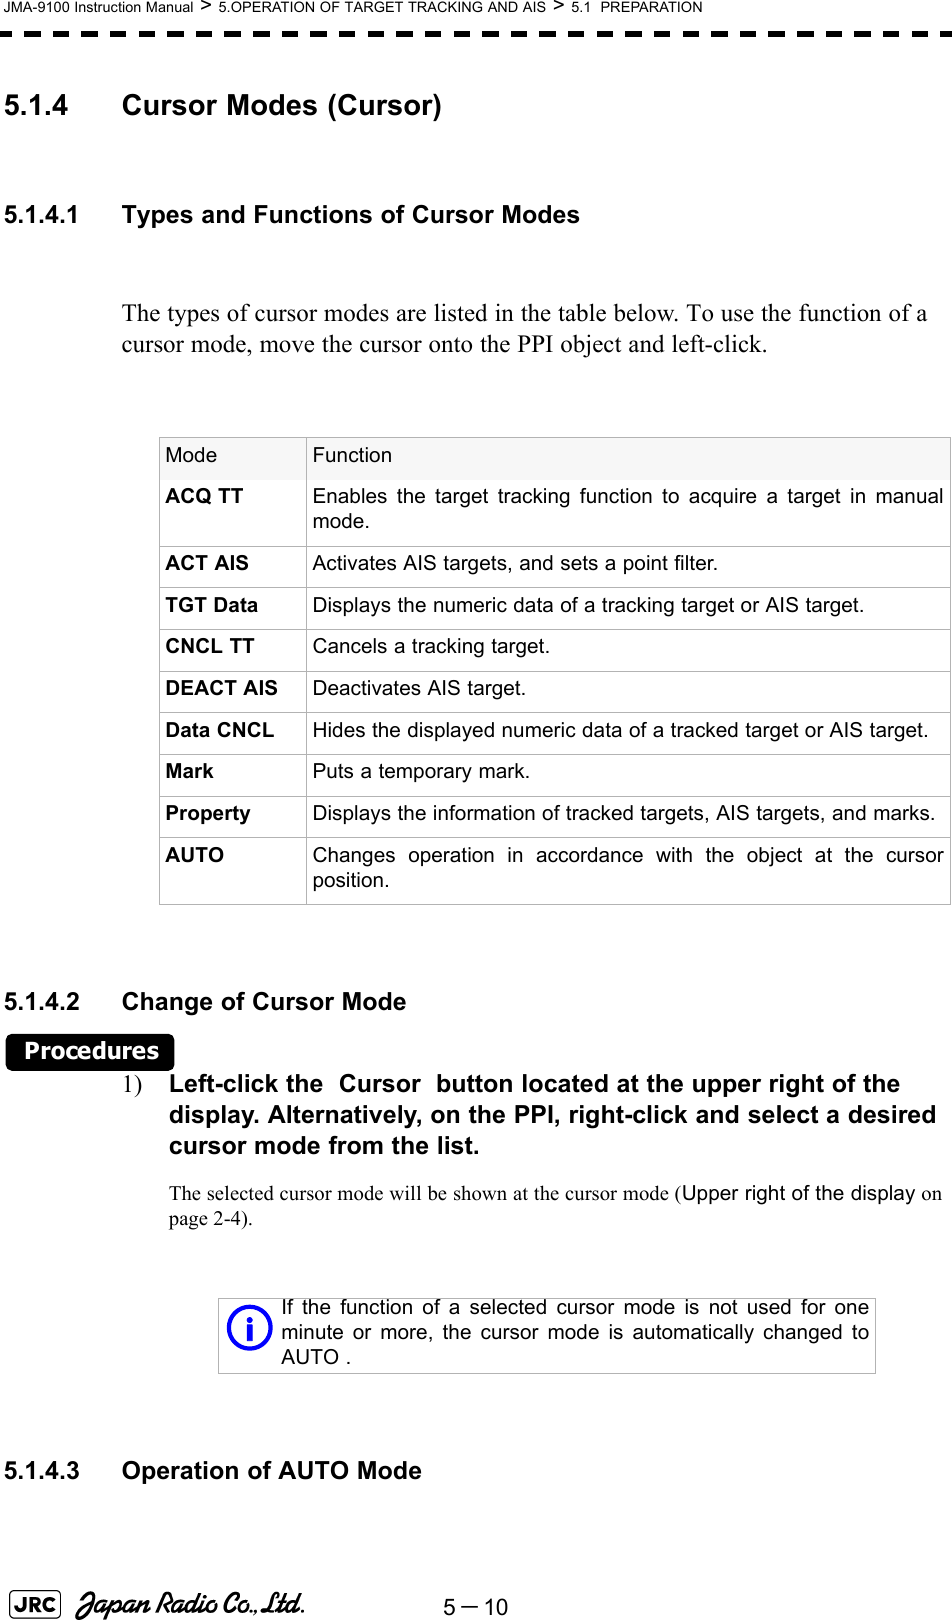 5－10JMA-9100 Instruction Manual &gt; 5.OPERATION OF TARGET TRACKING AND AIS &gt; 5.1  PREPARATION5.1.4 Cursor Modes (Cursor)5.1.4.1 Types and Functions of Cursor ModesThe types of cursor modes are listed in the table below. To use the function of a cursor mode, move the cursor onto the PPI object and left-click.5.1.4.2 Change of Cursor ModeProcedures1) Left-click the  Cursor  button located at the upper right of the display. Alternatively, on the PPI, right-click and select a desired cursor mode from the list.The selected cursor mode will be shown at the cursor mode (Upper right of the display on page 2-4).5.1.4.3 Operation of AUTO ModeMode FunctionACQ TT Enables the target tracking function to acquire a target in manualmode.ACT AIS Activates AIS targets, and sets a point filter.TGT Data Displays the numeric data of a tracking target or AIS target.CNCL TT Cancels a tracking target.DEACT AIS Deactivates AIS target.Data CNCL Hides the displayed numeric data of a tracked target or AIS target.Mark Puts a temporary mark.Property Displays the information of tracked targets, AIS targets, and marks.AUTO Changes operation in accordance with the object at the cursorposition.If the function of a selected cursor mode is not used for oneminute or more, the cursor mode is automatically changed toAUTO .i